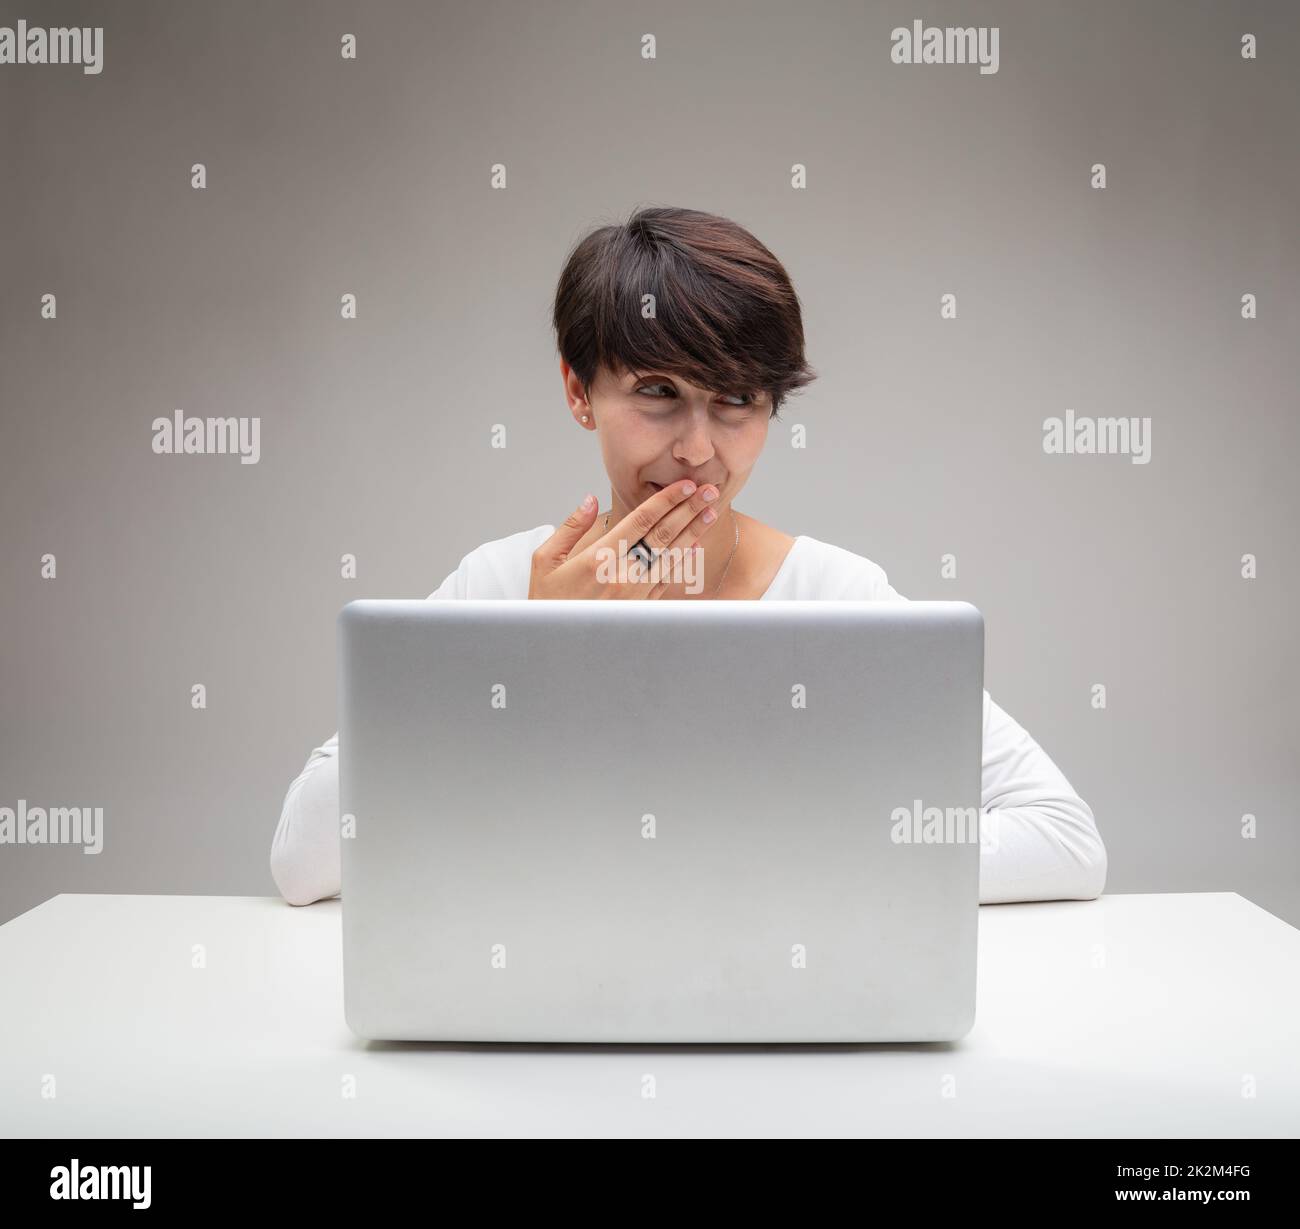 Amused businesswoman giggling to herself Stock Photo